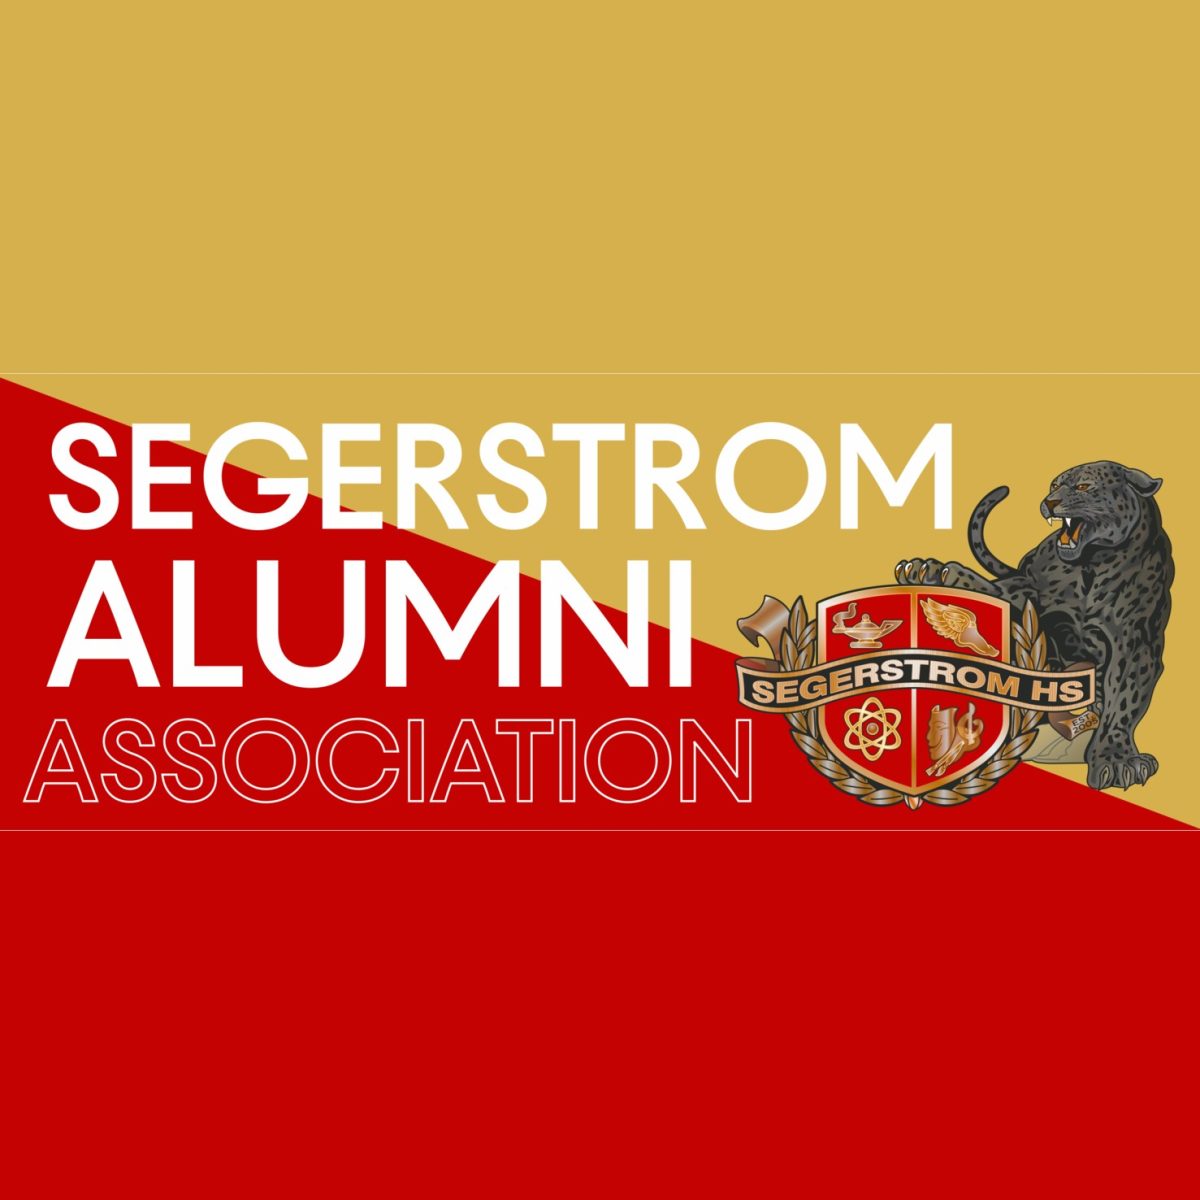 The alumni association has been working towards connecting alumni throughout the 2023-2024 year.